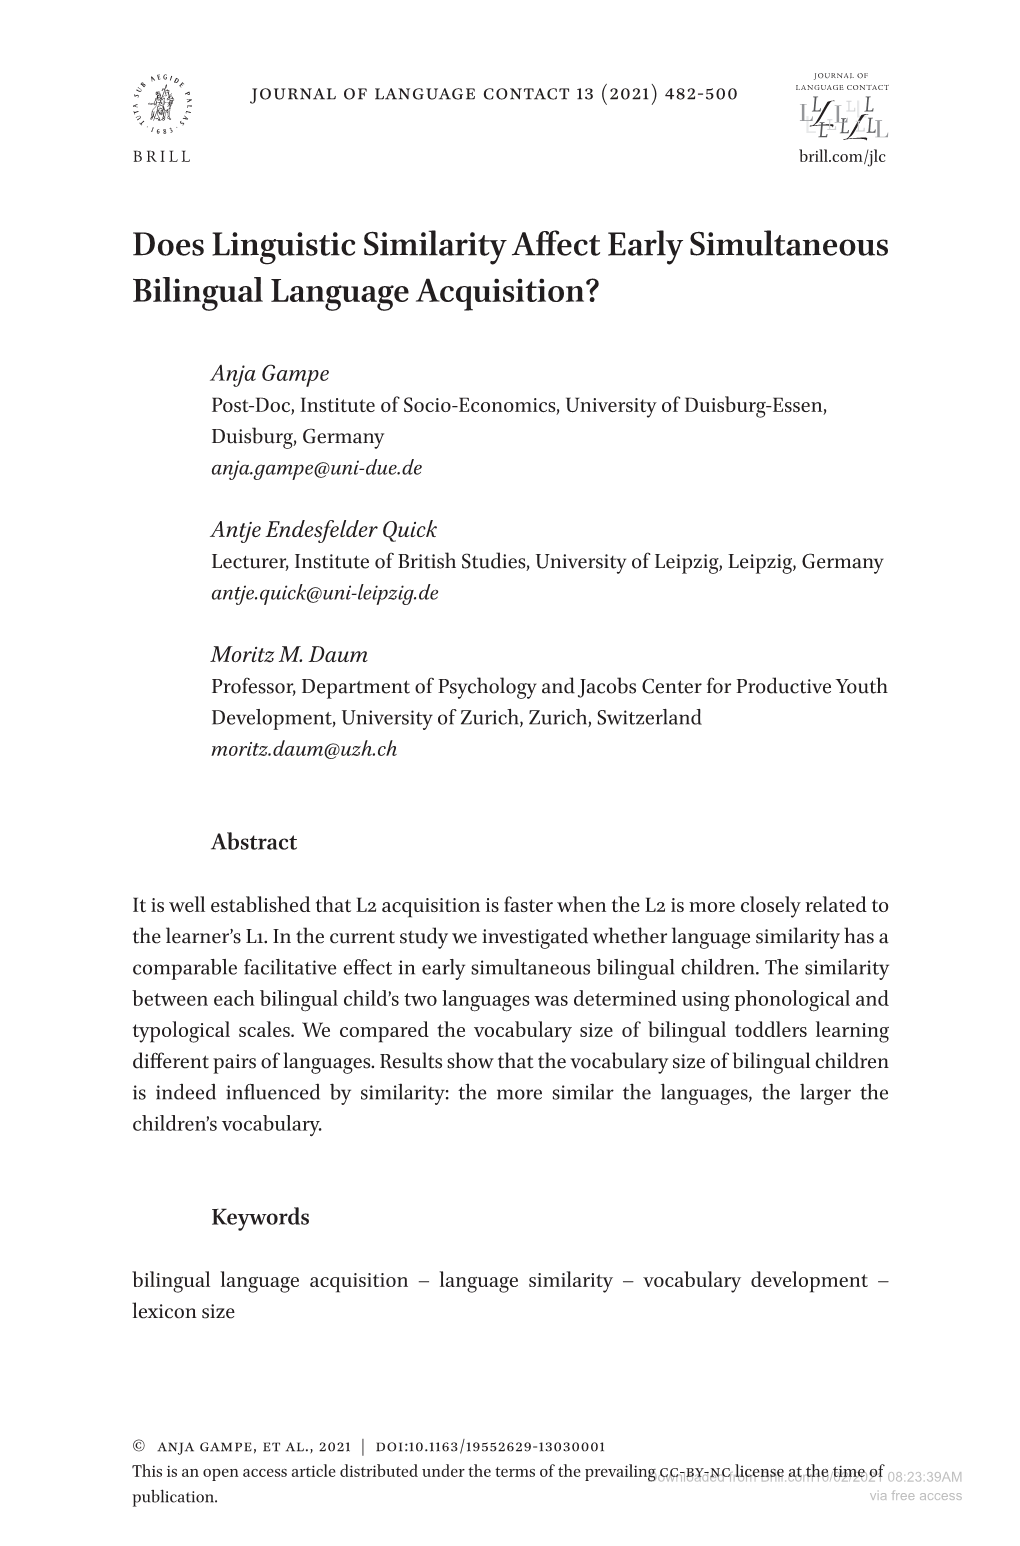 Does Linguistic Similarity Affect Early Simultaneous Bilingual Language Acquisition?